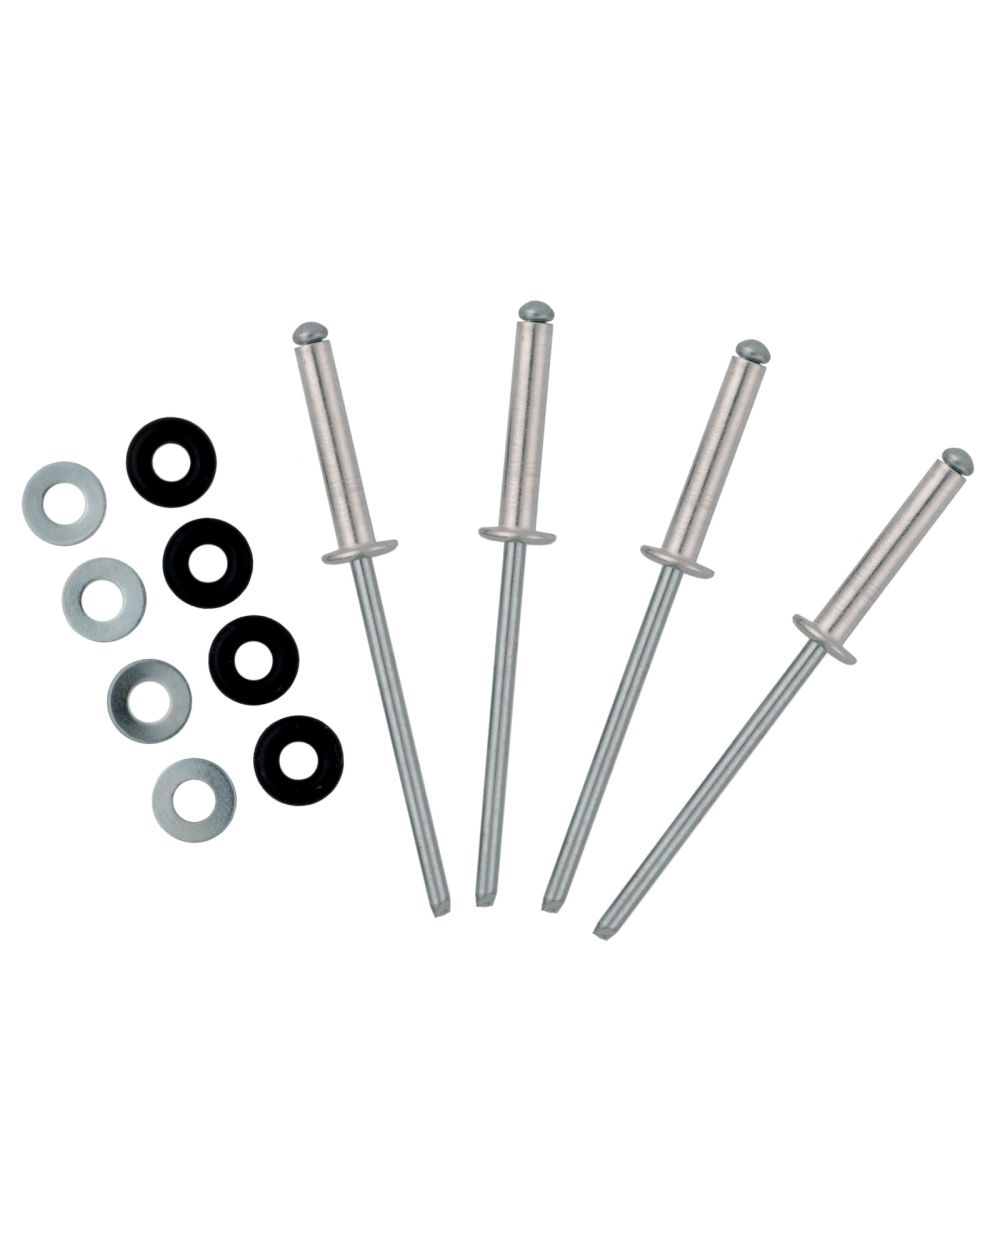 Rivet-Set, Silver, compl. with O-Rings + Washers, for Sprocket Cover  Repair, 12 Pcs.